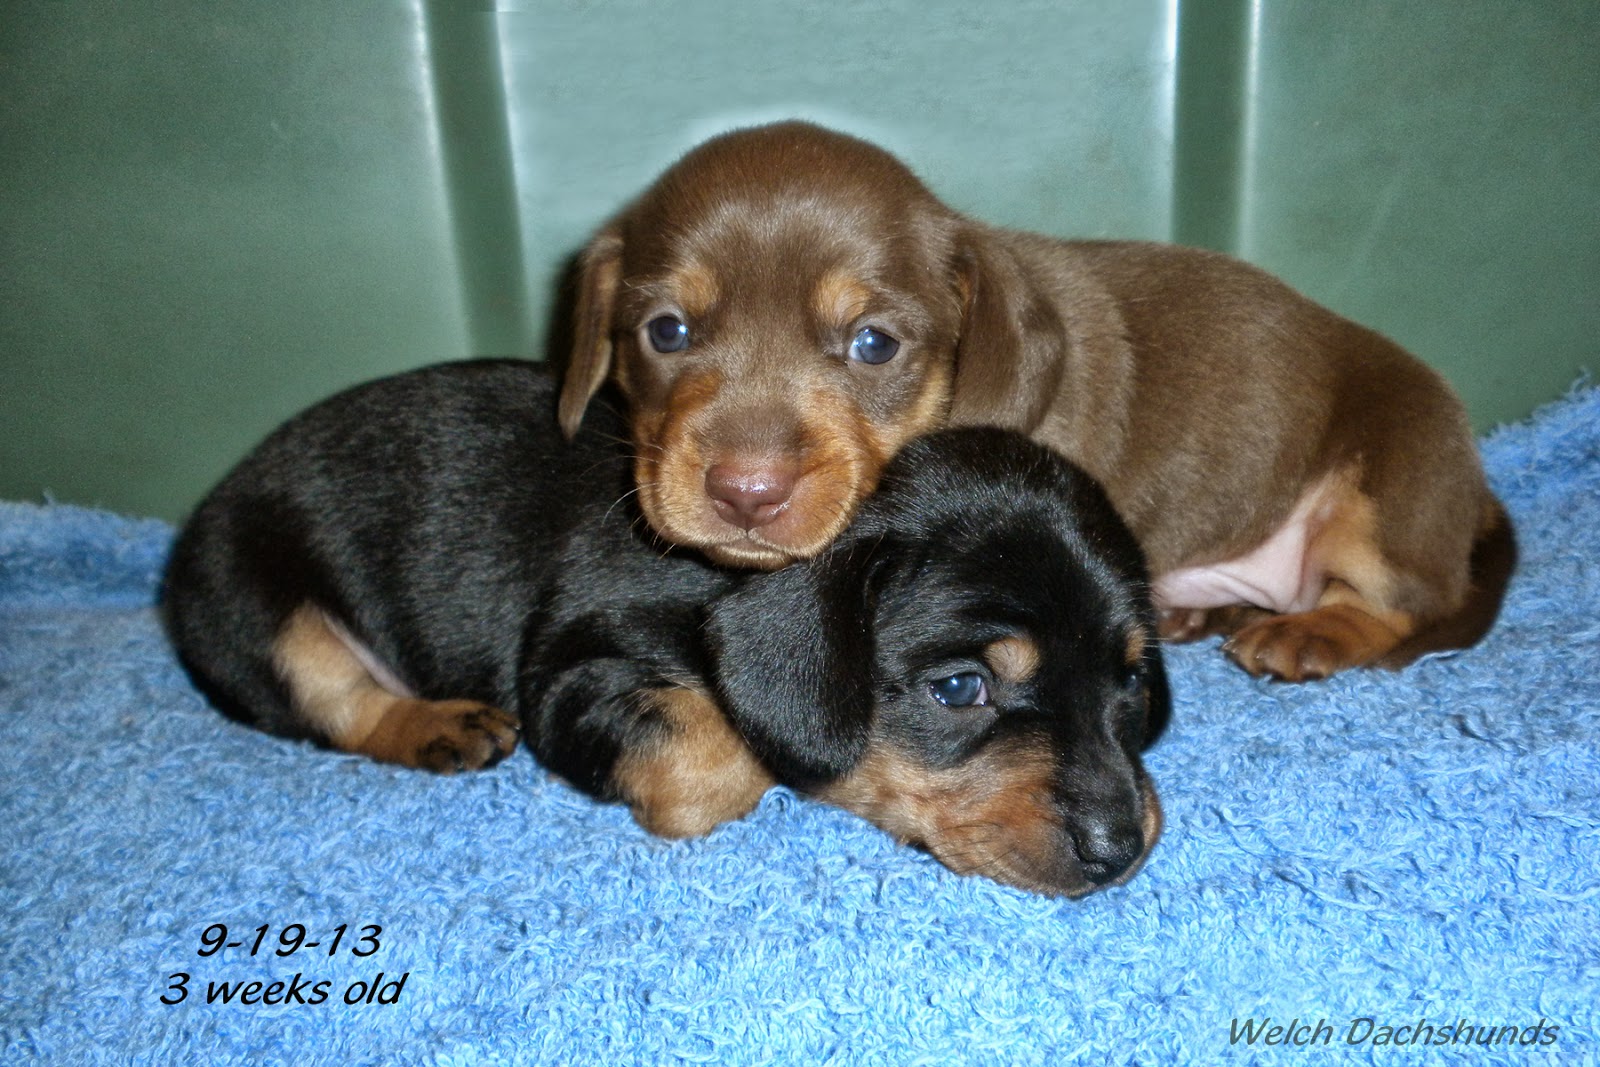 Welch Dachshunds: 9-21-13 Dixie's pups 3 weeks old